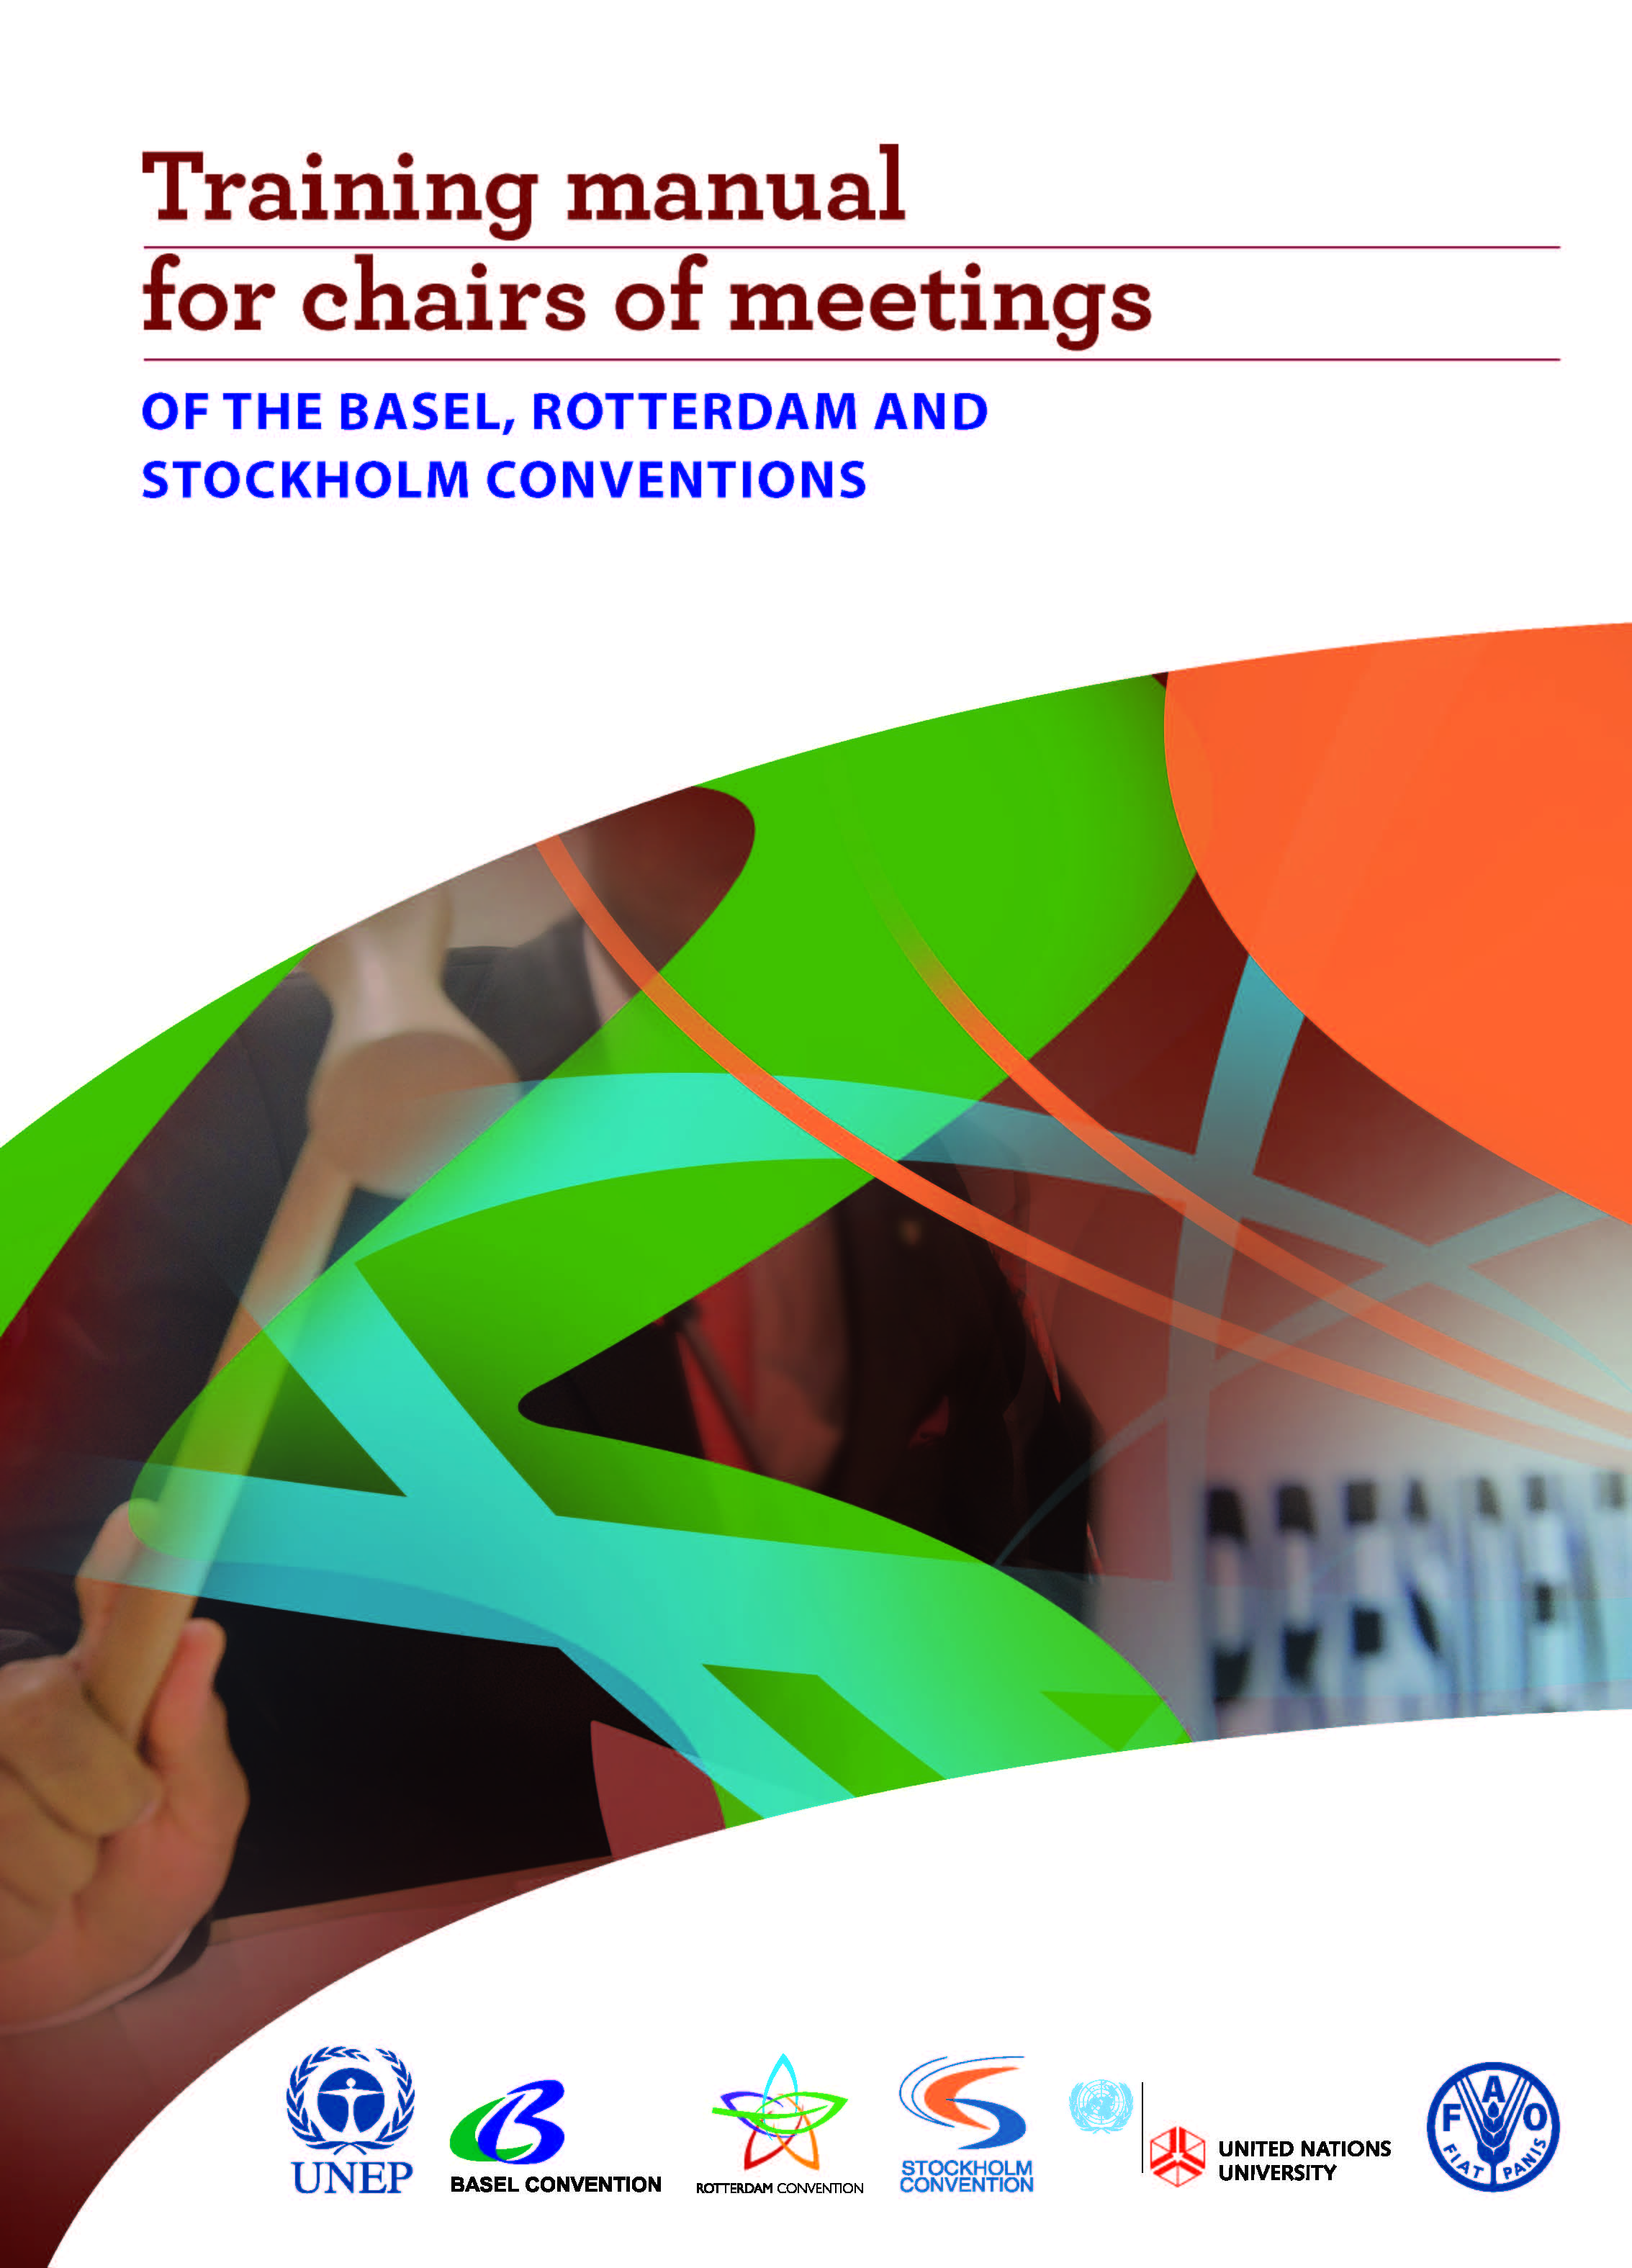 Training Manual for Chairs of Meetings of the Basel, Rotterdam and Stockholm Conventions